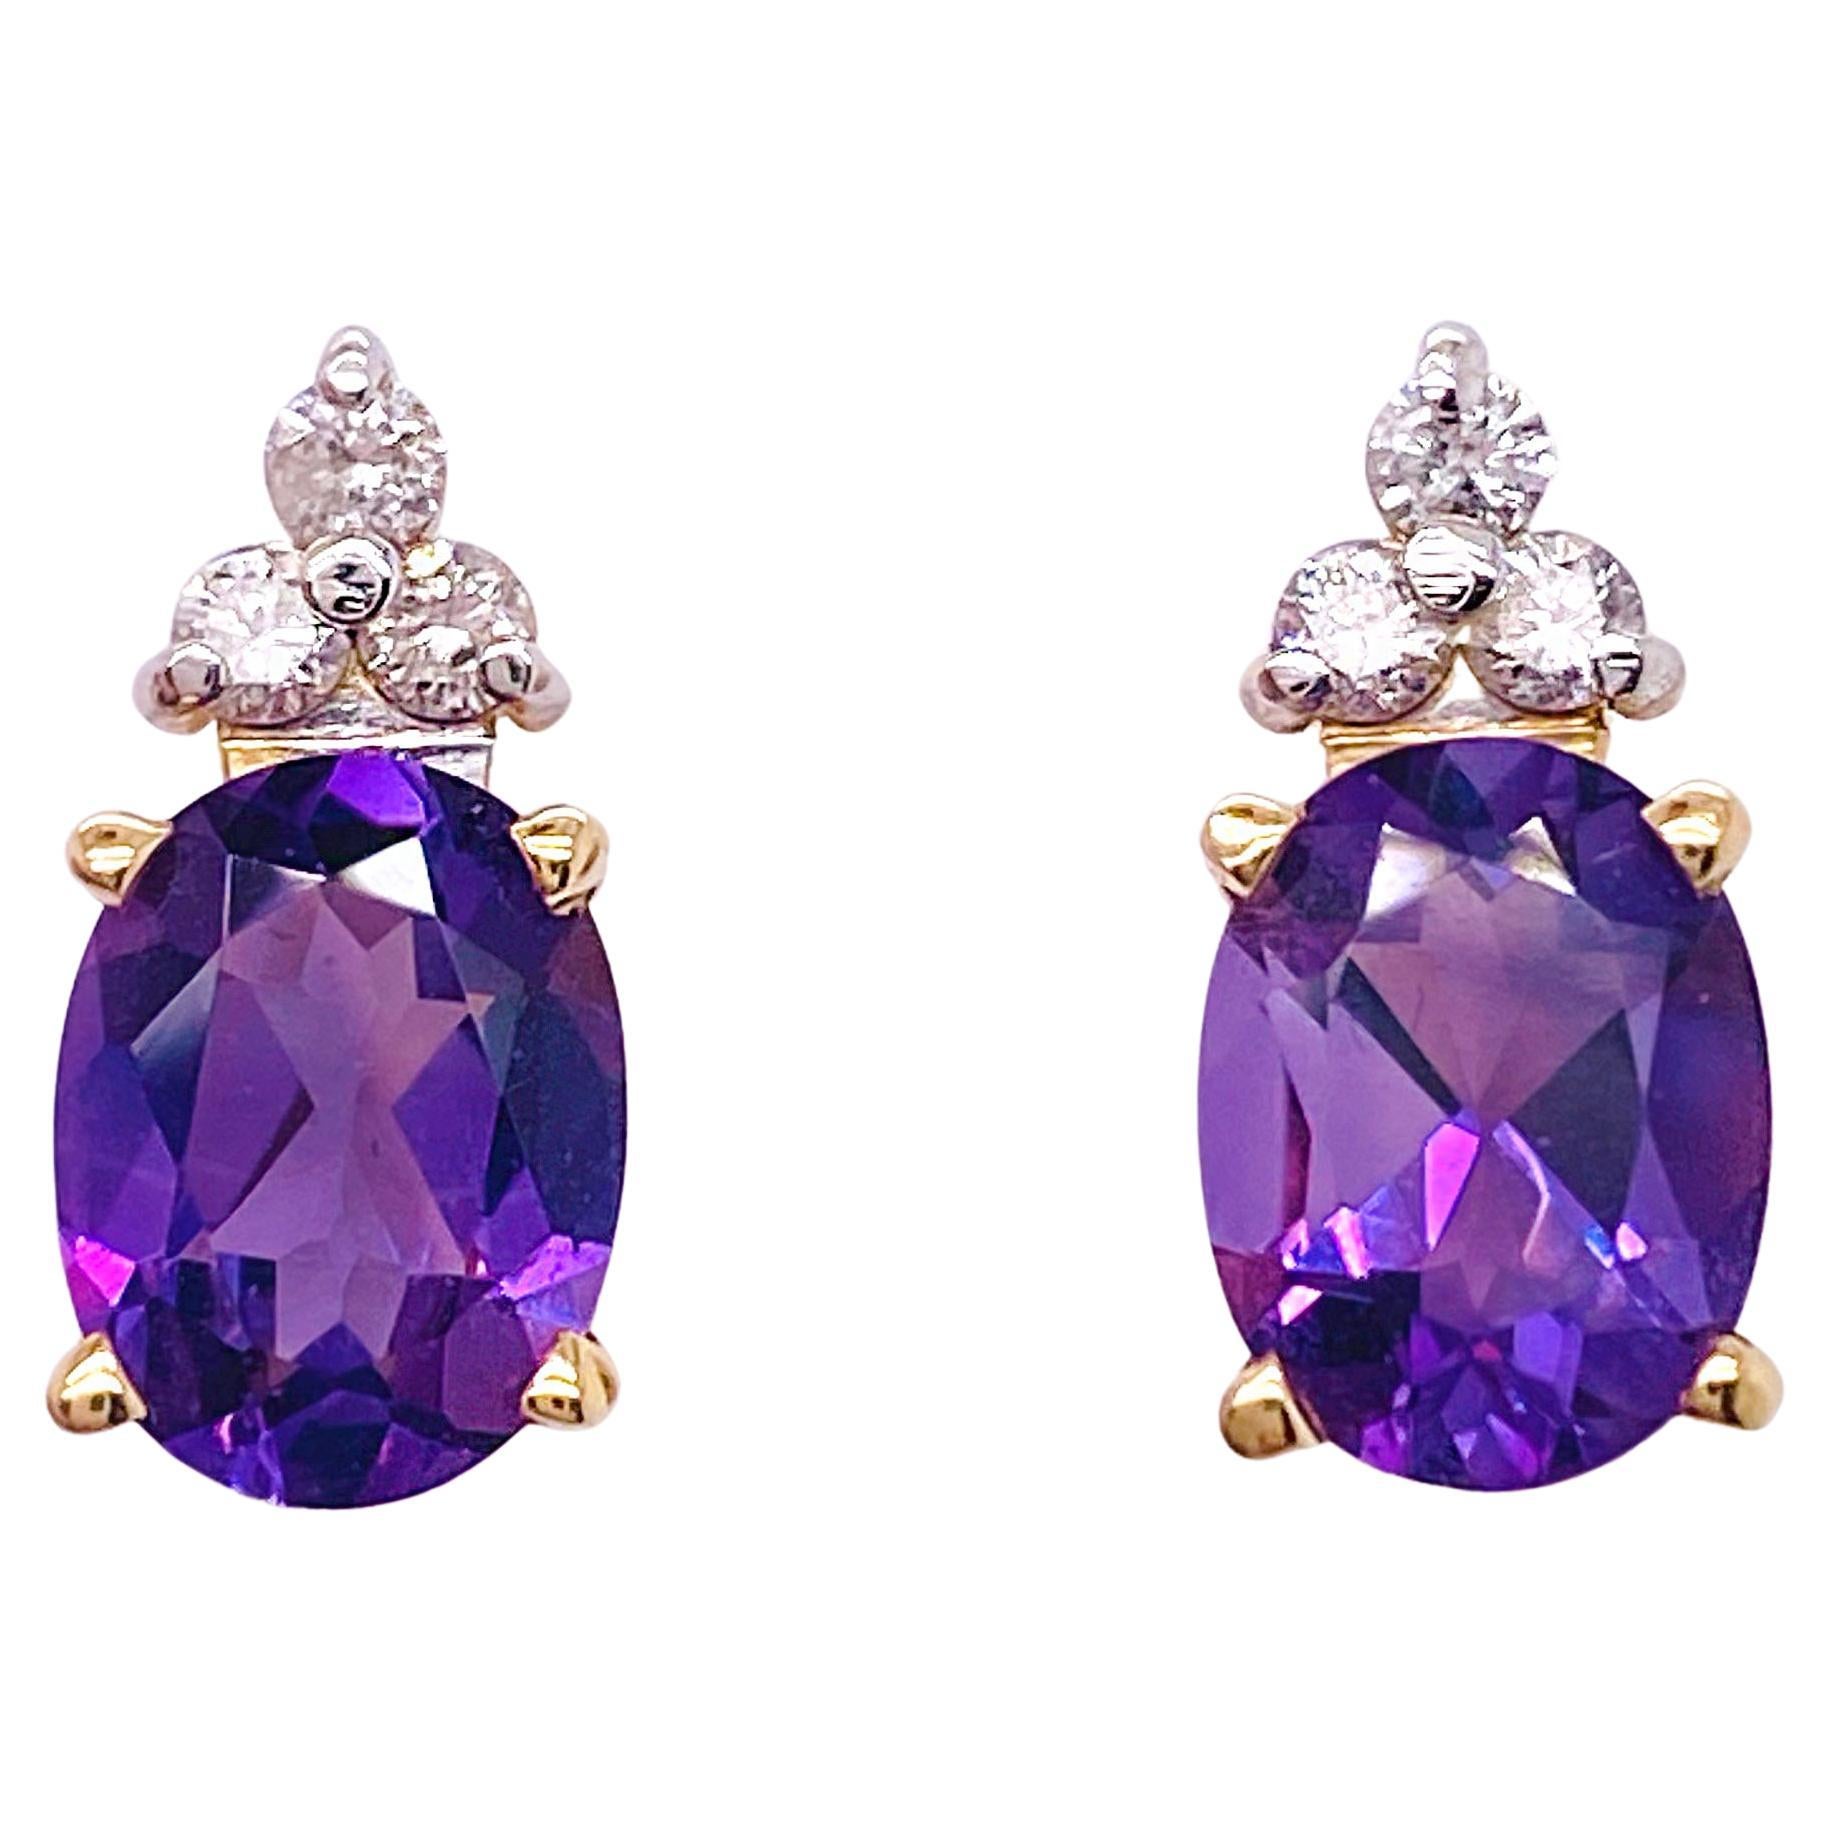 Oval Amethyst and Diamond Cluster Earring Studs 14 Karat Yellow Gold, February